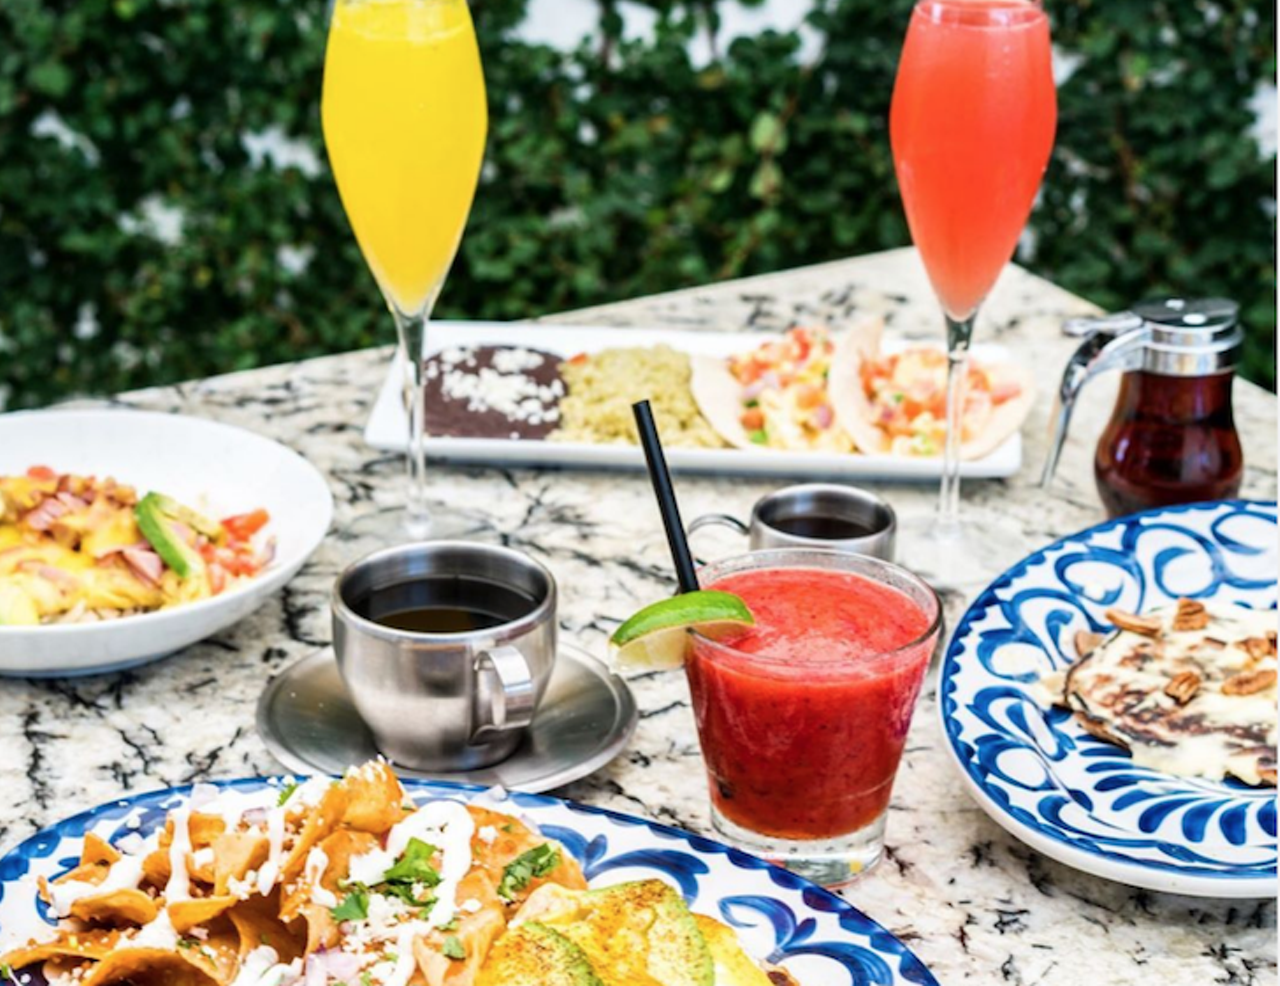  Miguelitos Taqueria Y Tequilas  
2702 W. Kennedy Blvd., Tampa, 813-872-5600
This Mexican joint is doing more than tequila. Every Saturday and Sunday from 11 a.m. to 3 p.m., Miguelitos is slinging bottomless mimosas for $12. 
Photo via  @miguelitostampa/Instagram 